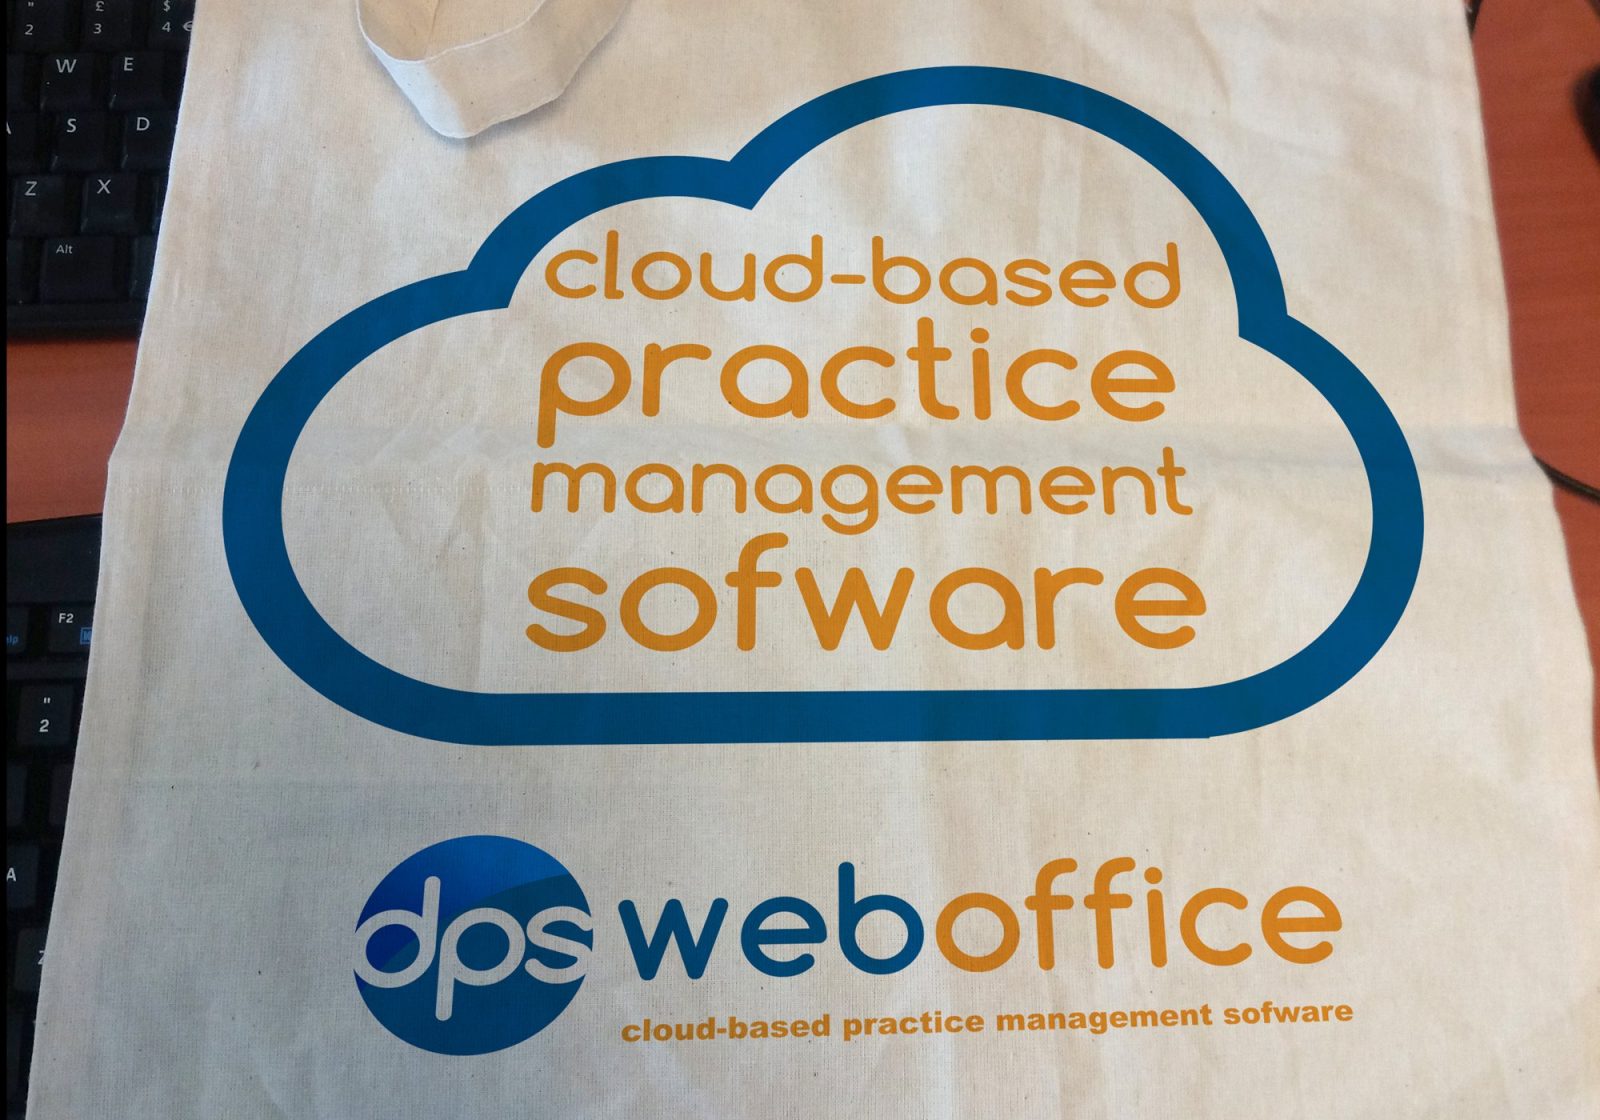 A tote bag for DPS Software showing the cloud logo and text